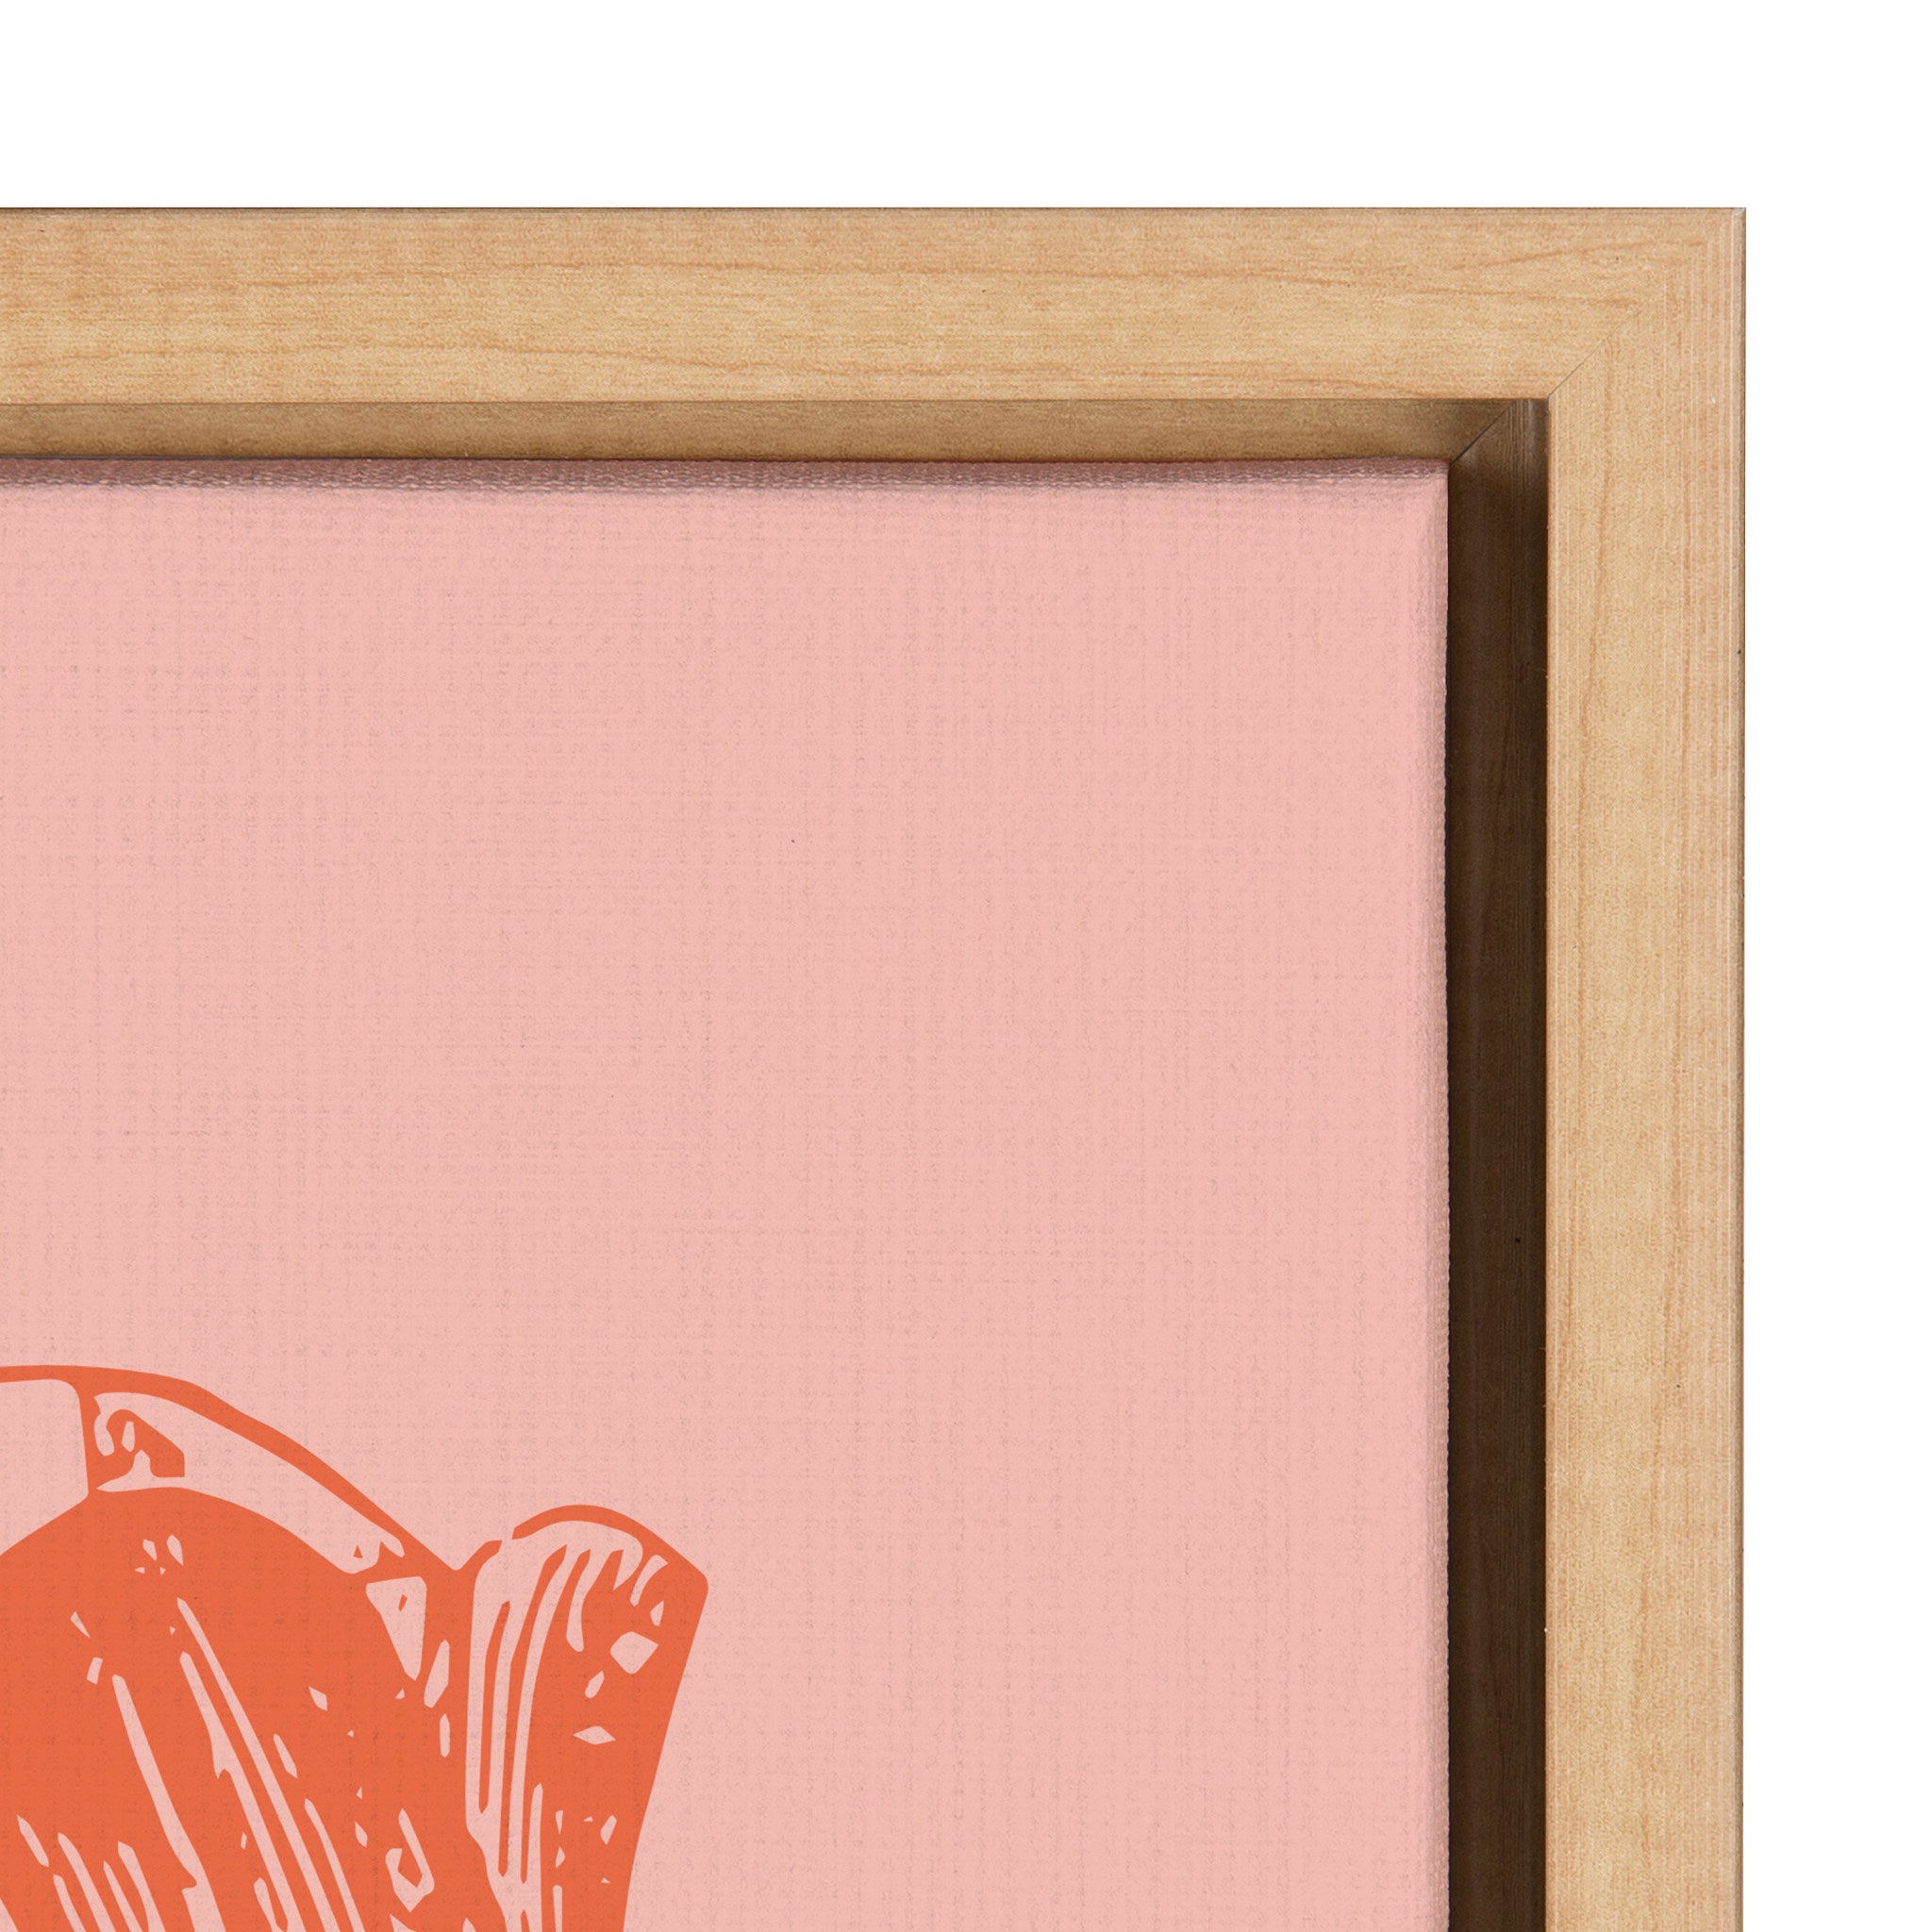 Sylvie Tulip in Pink and Orange Framed Canvas by Apricot and Birch